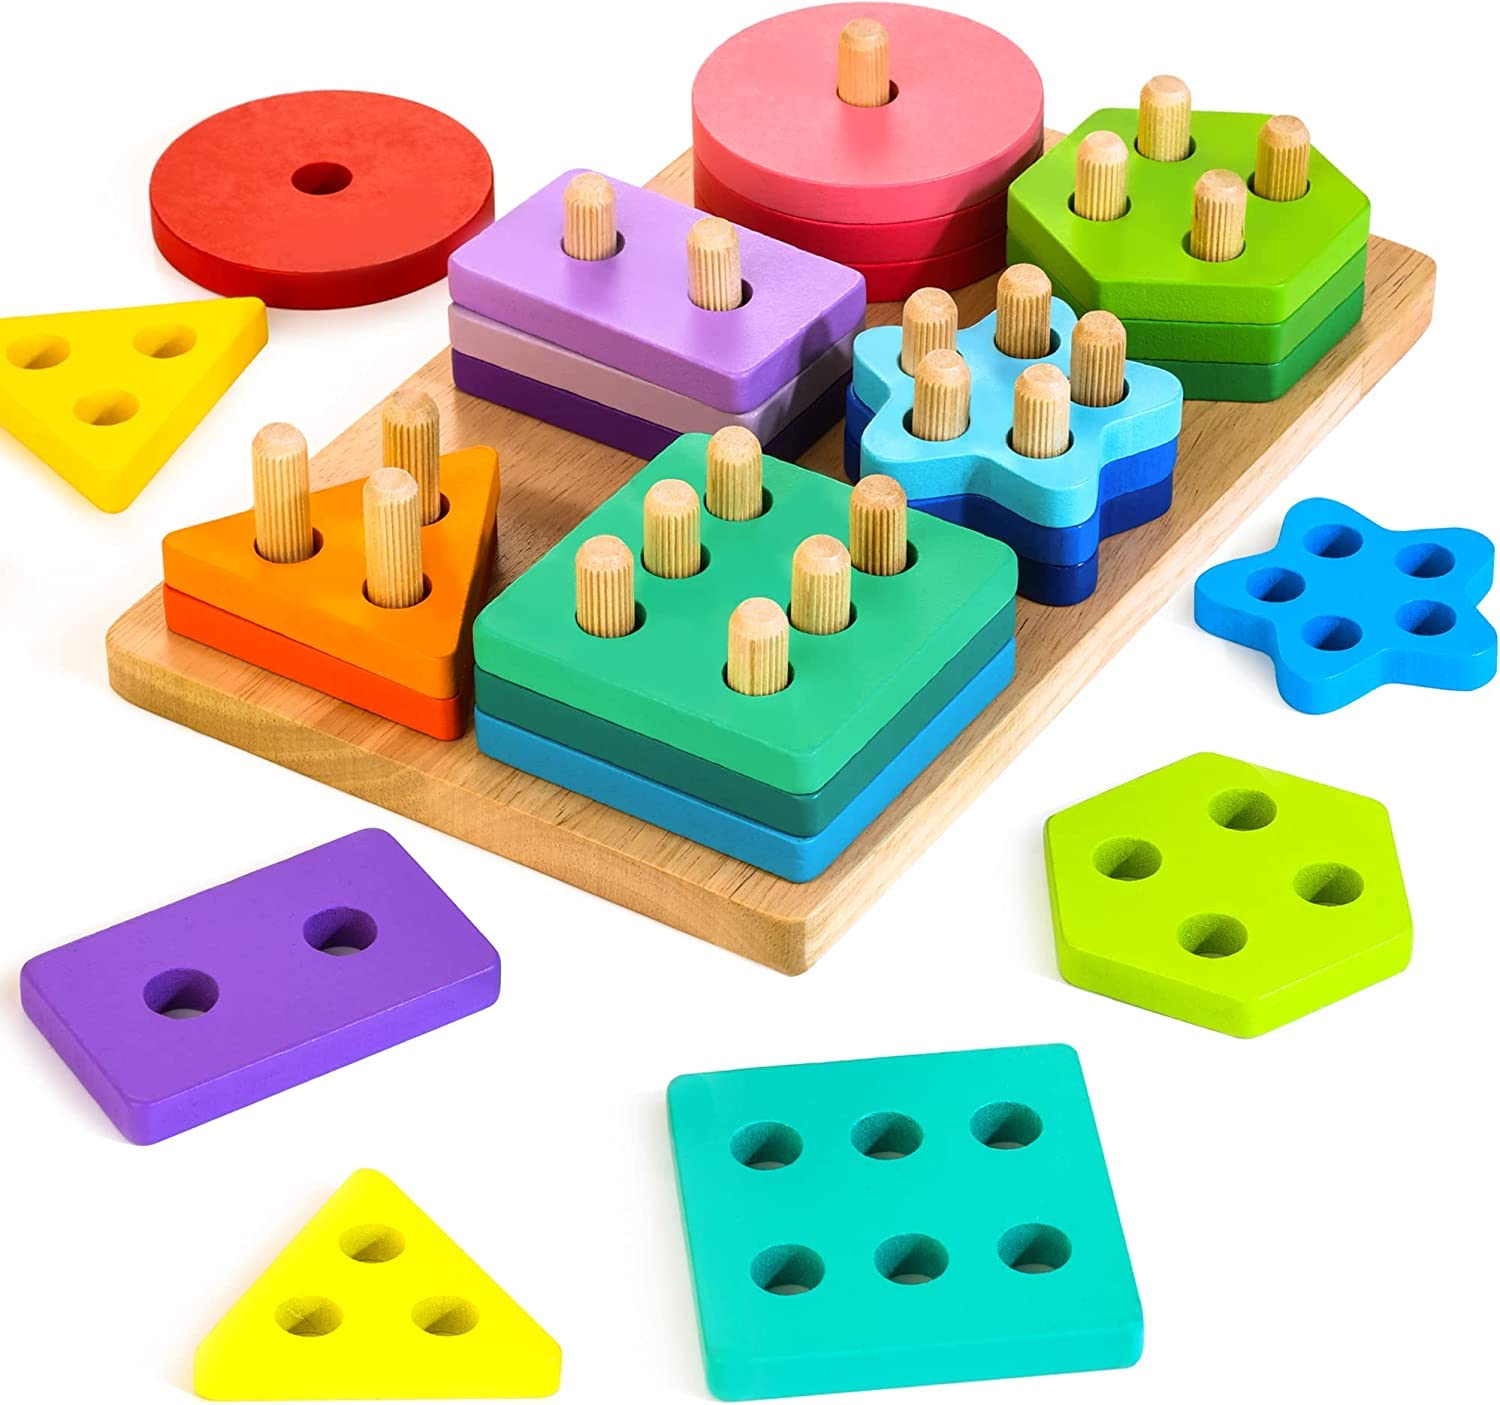 HELLOWOOD Wooden Sorting & Stacking Toys